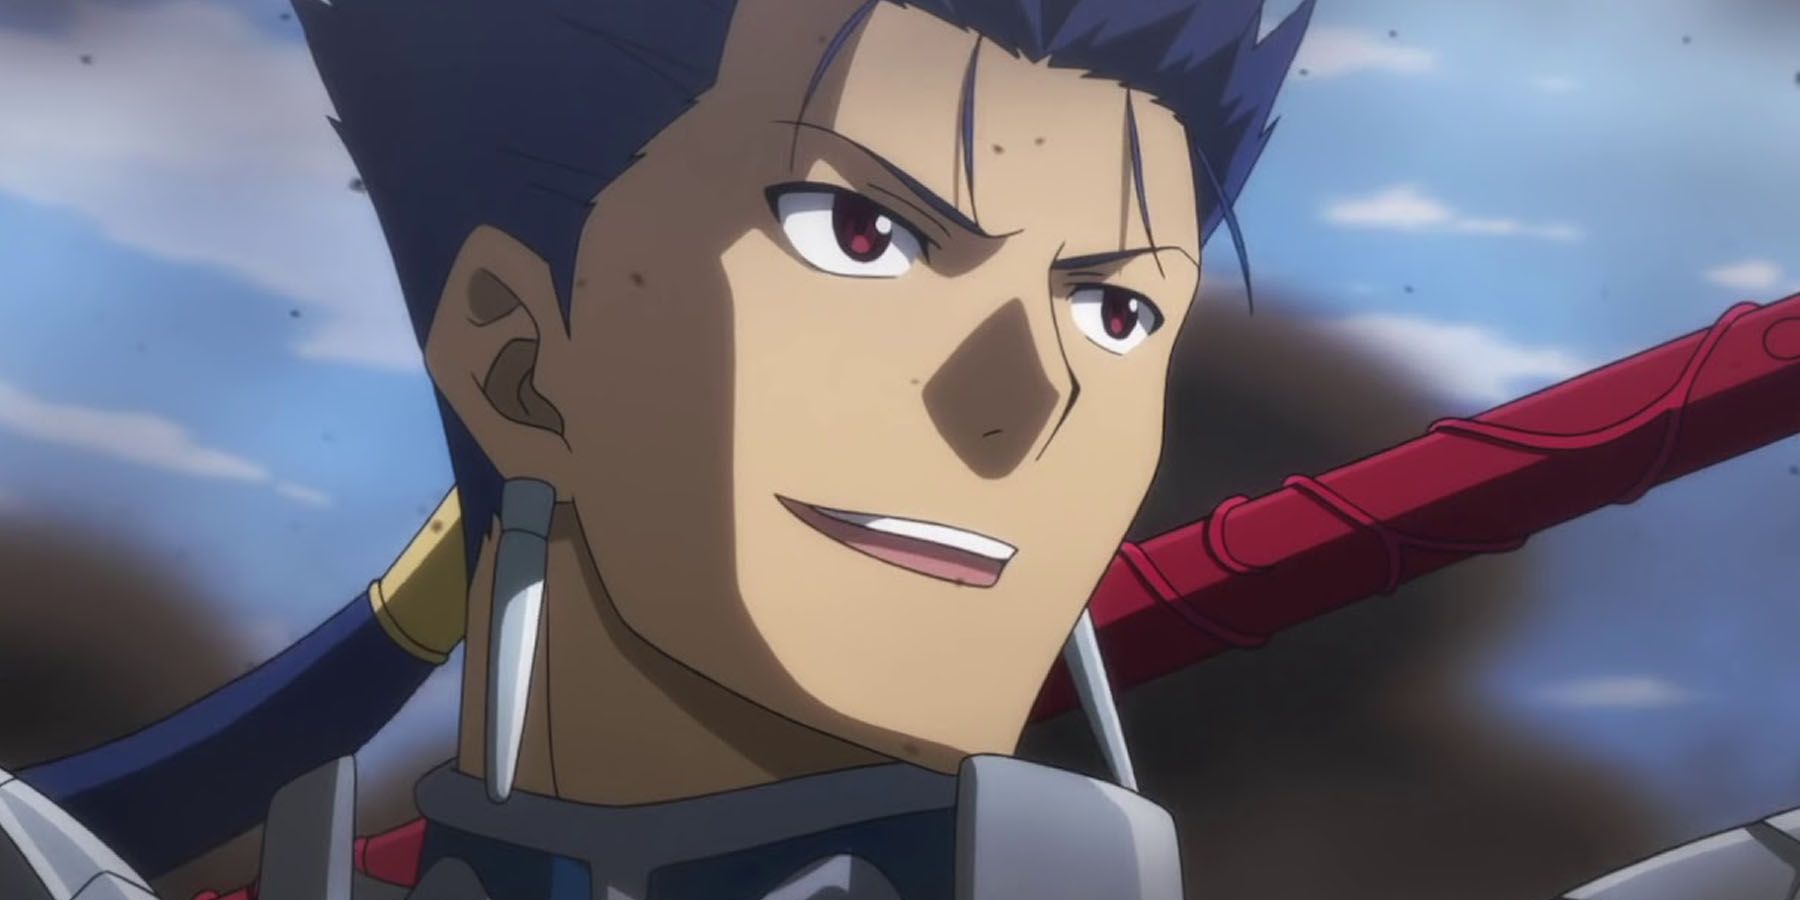 Lancer (Fate/stay night)/#1891484 | Fullsize Image (1500x962) | Fate stay  night, Fate stay night anime, Cú chulainn